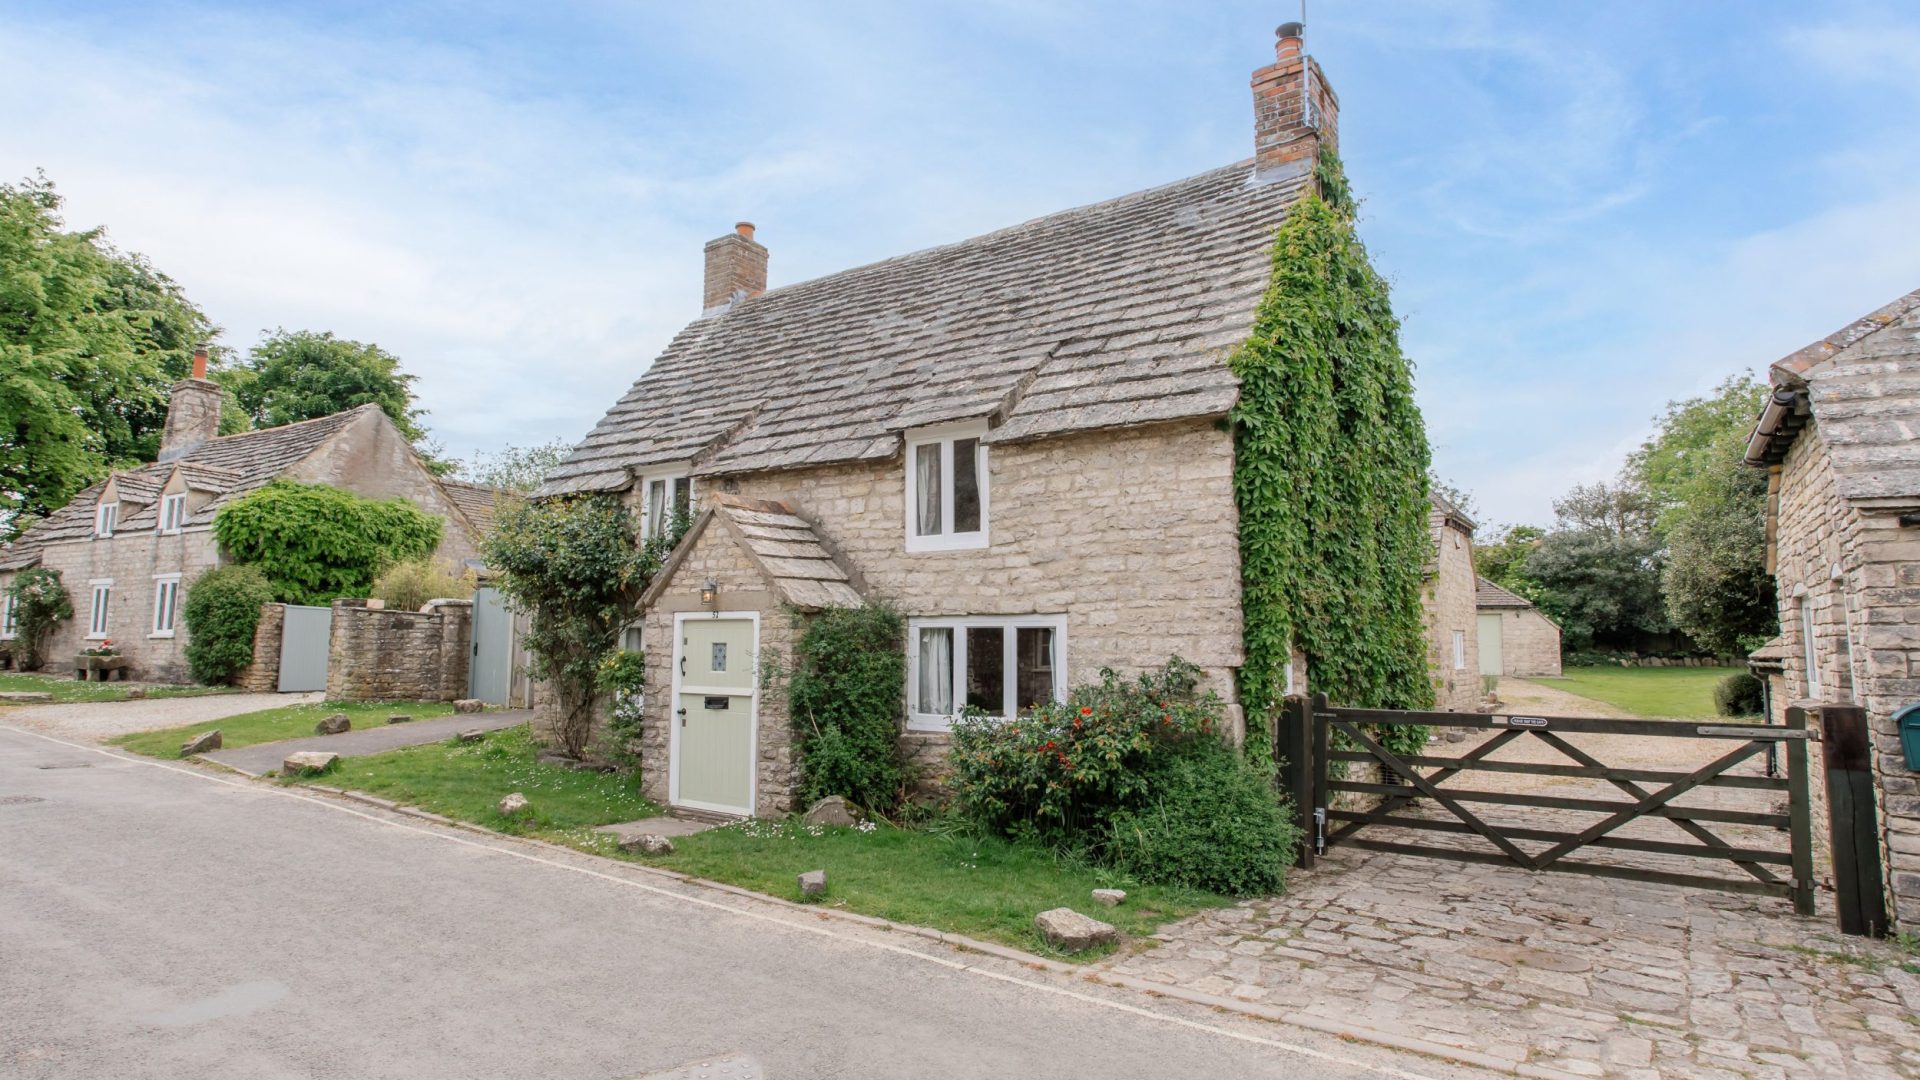 Castle View House, a traditional stone luxury holiday cottage in Dorset